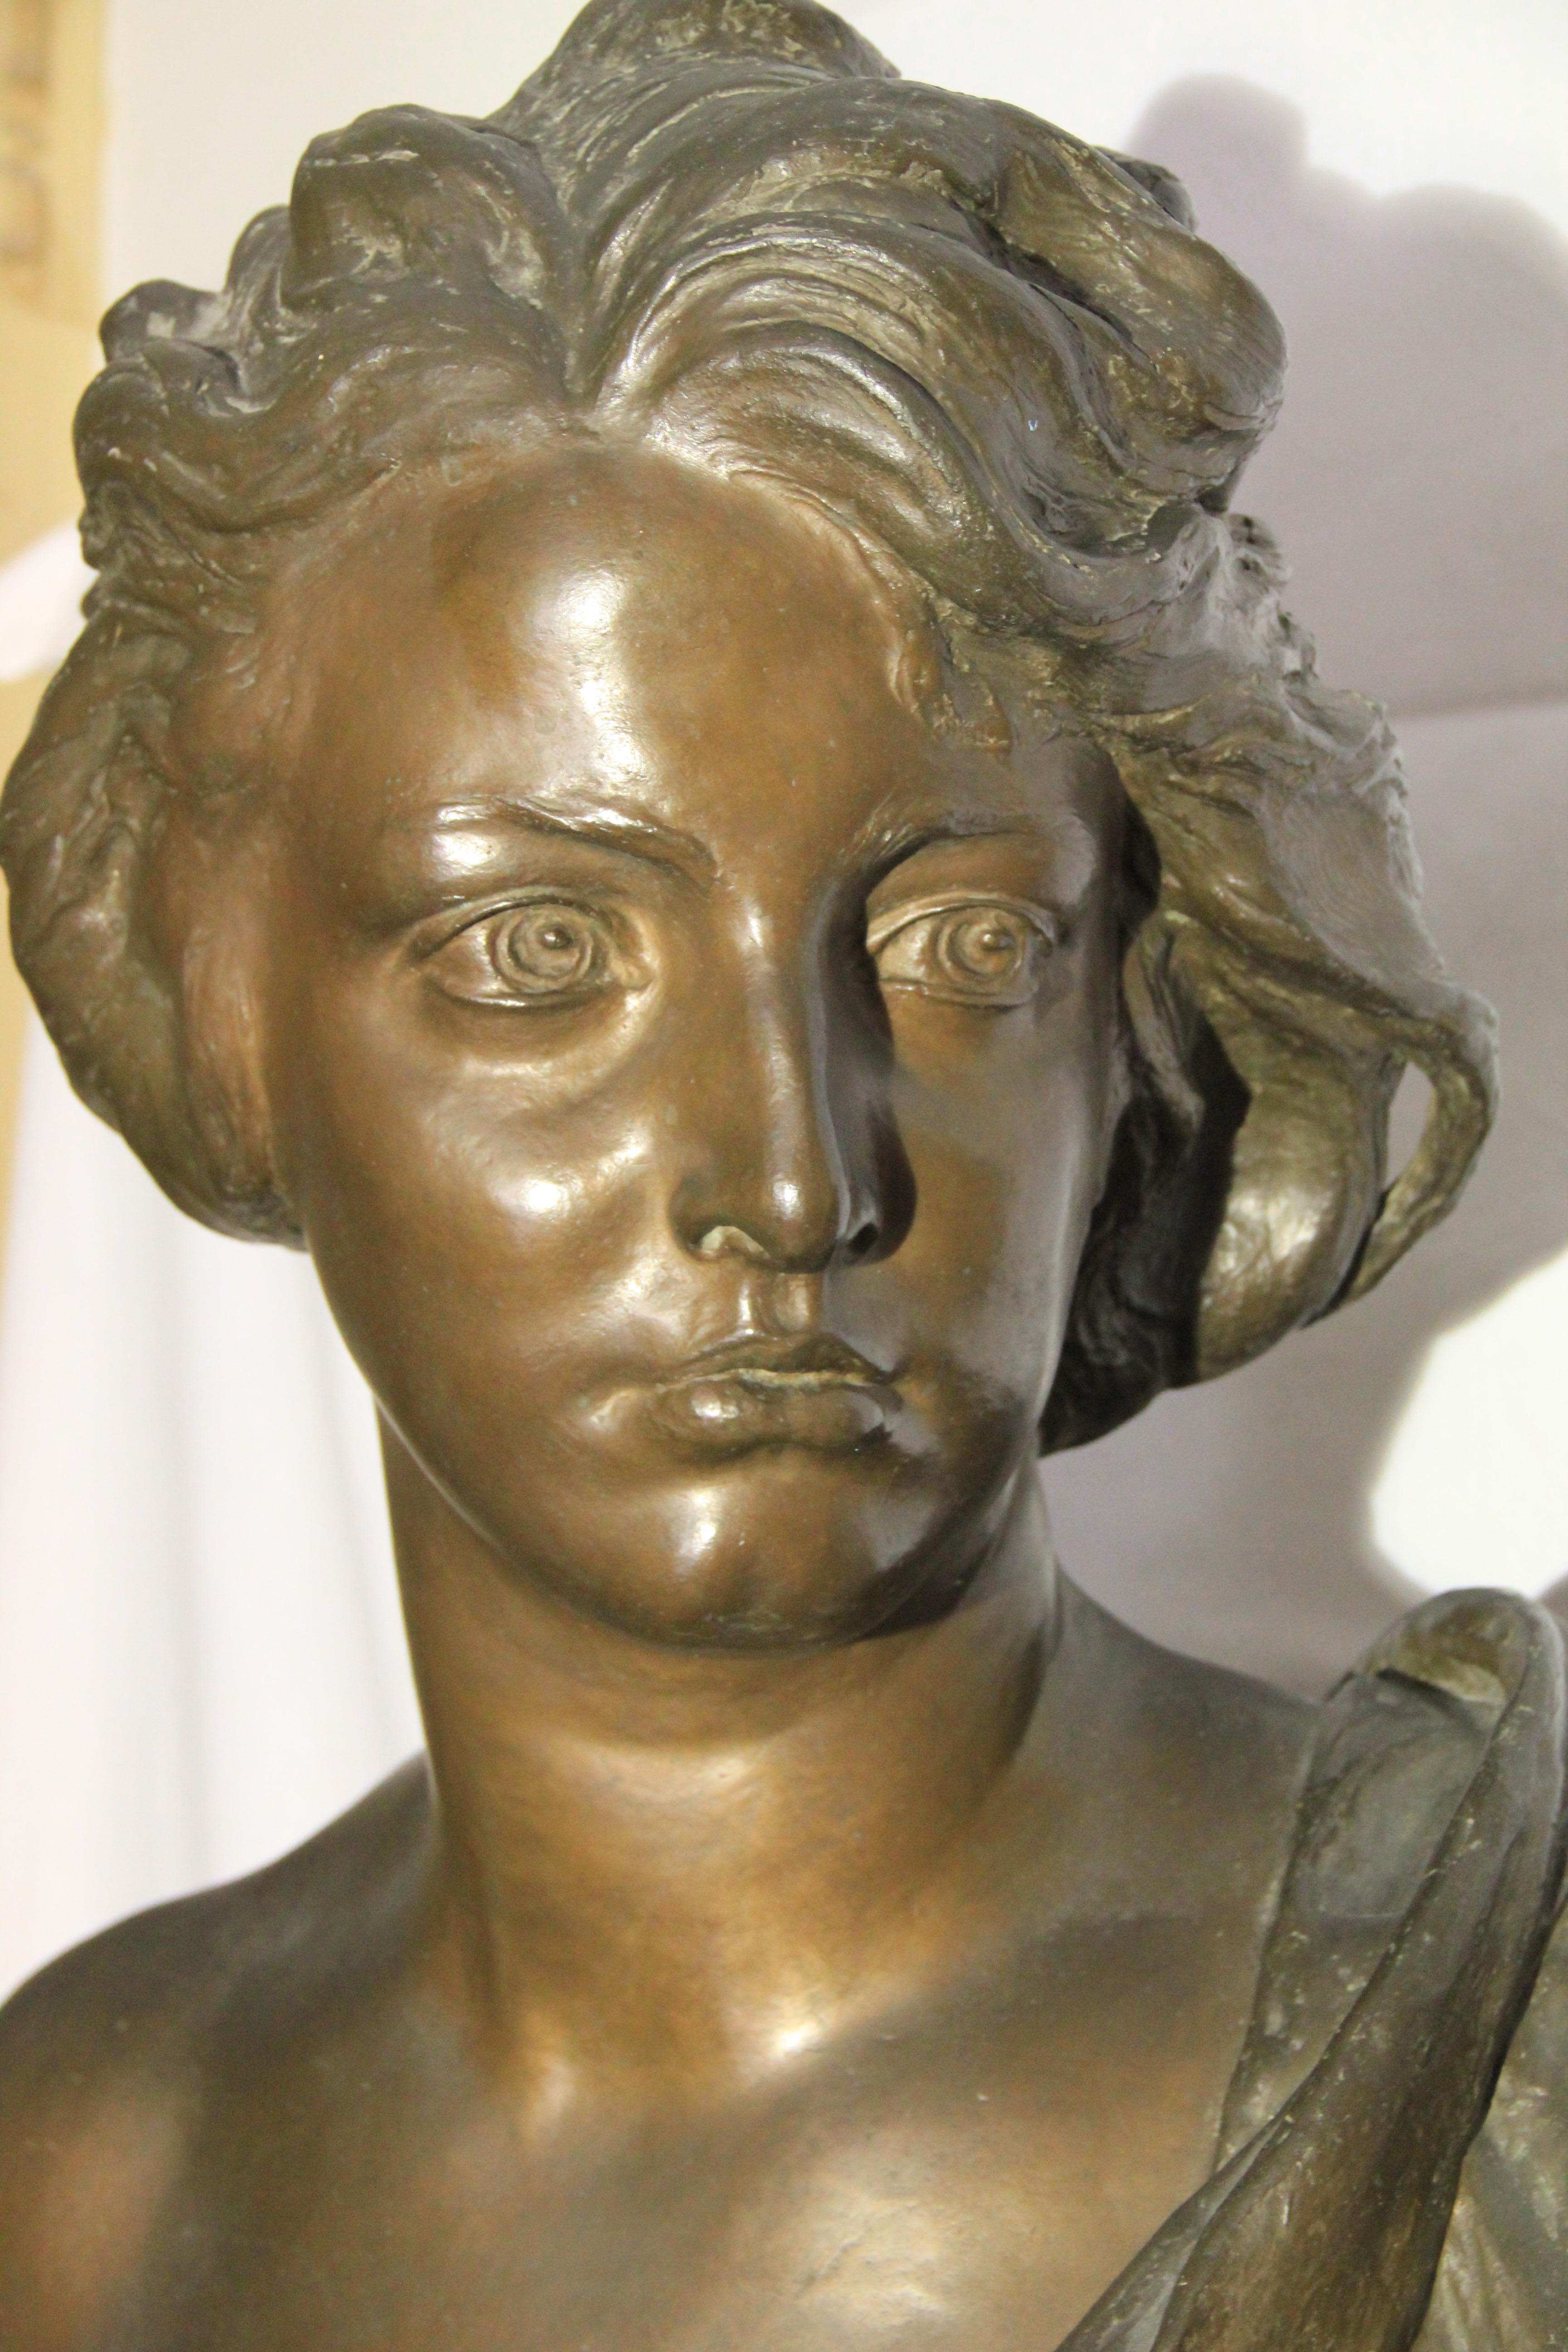 The bust, in bronze set on a marble column and plateau comes in three pieces, with a height of 120 cm and weighing 250kg, is a Fine example of this well-known Sculptors work, it is been exhibited at the International exhibition of Art of Venice in